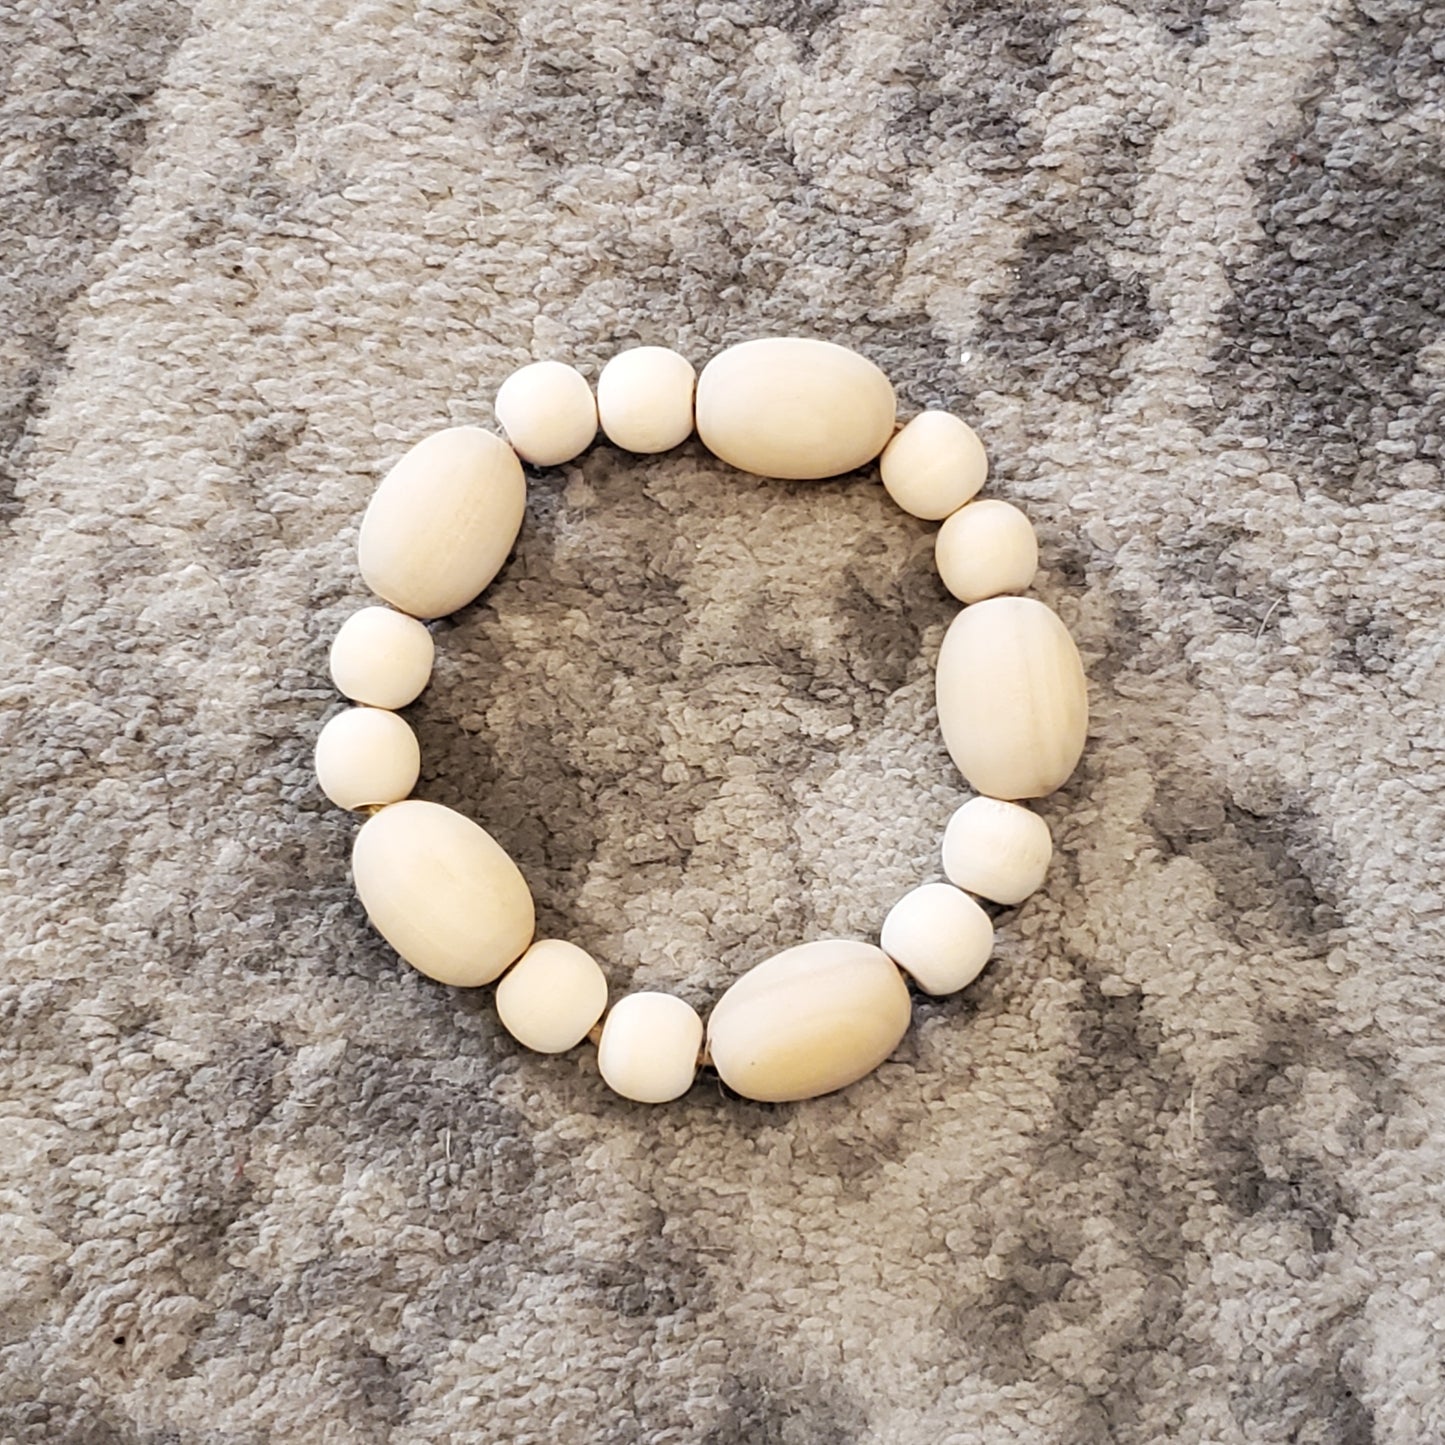 Wood Bead Candle Ring